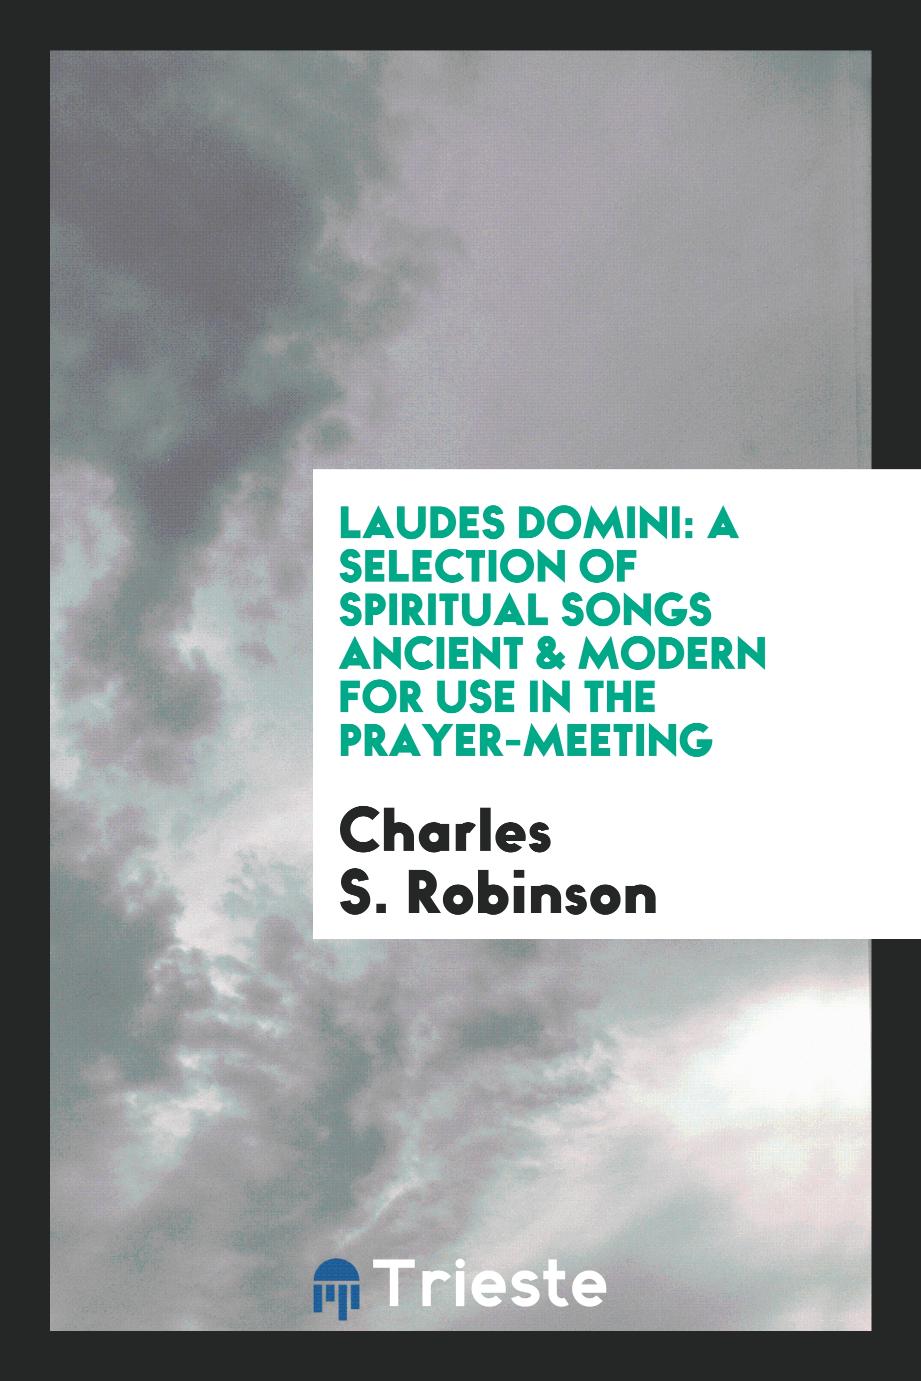 Laudes Domini: a selection of spiritual songs ancient & modern for use in the prayer-meeting